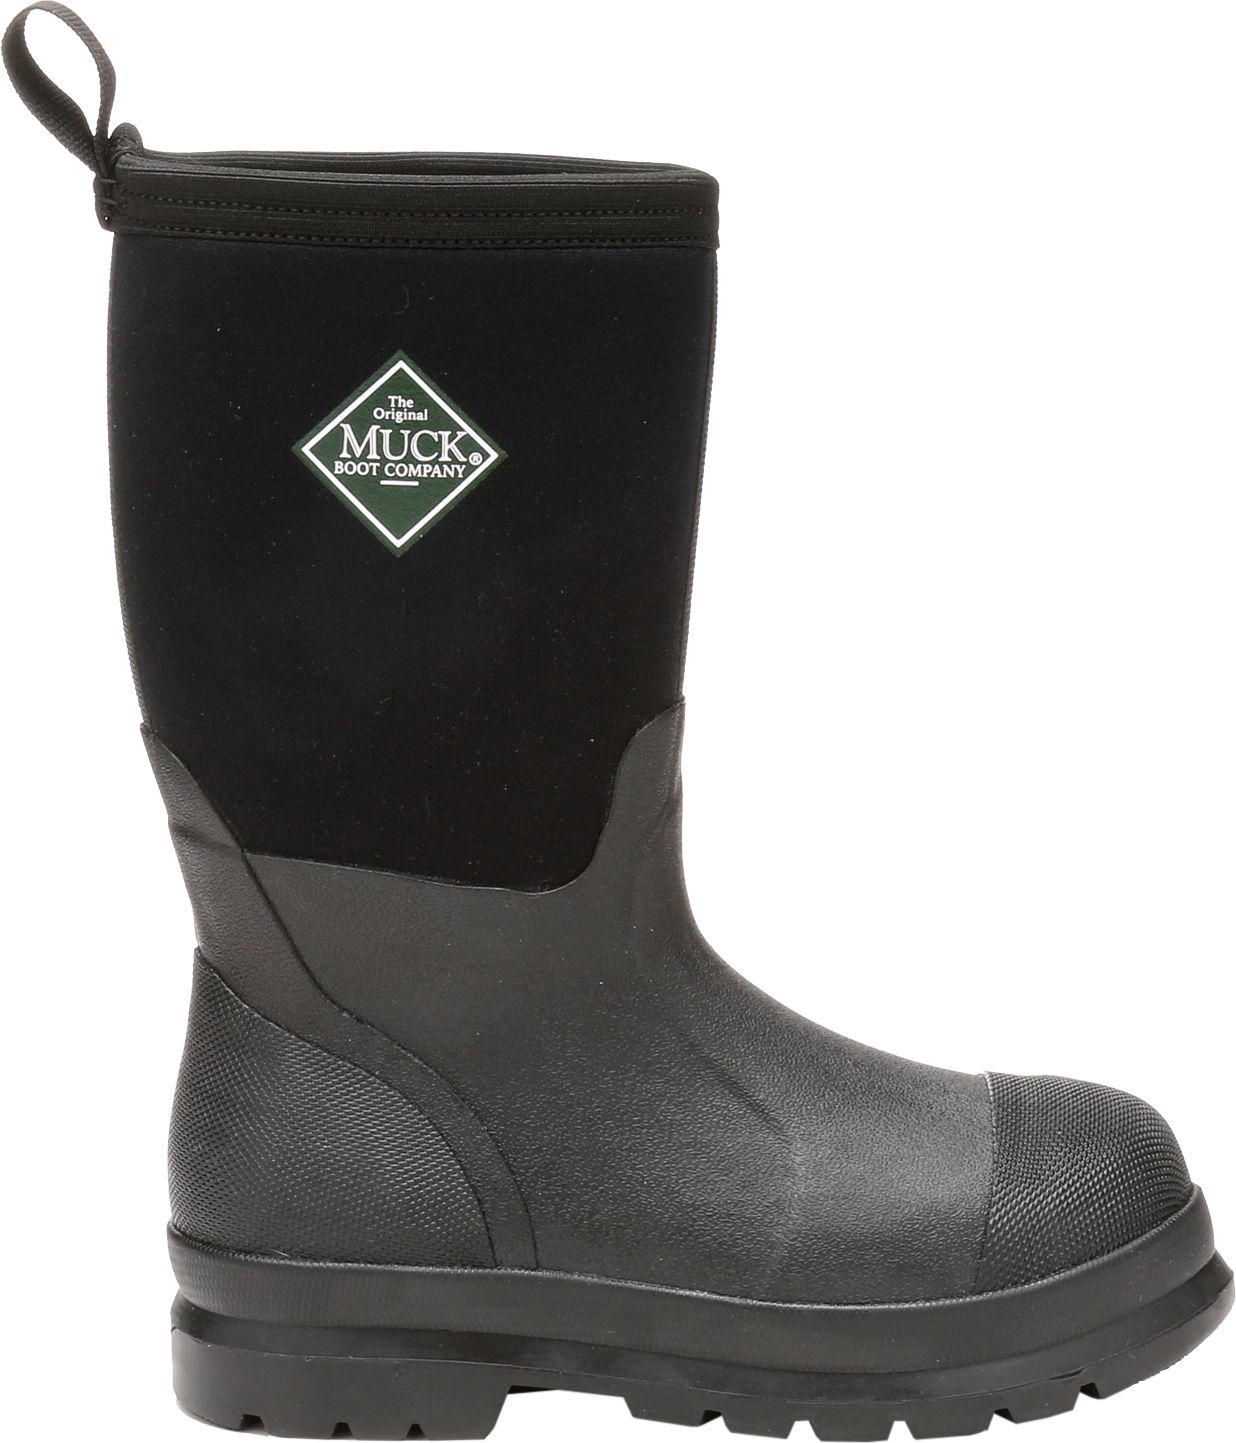 kids insulated waterproof boots